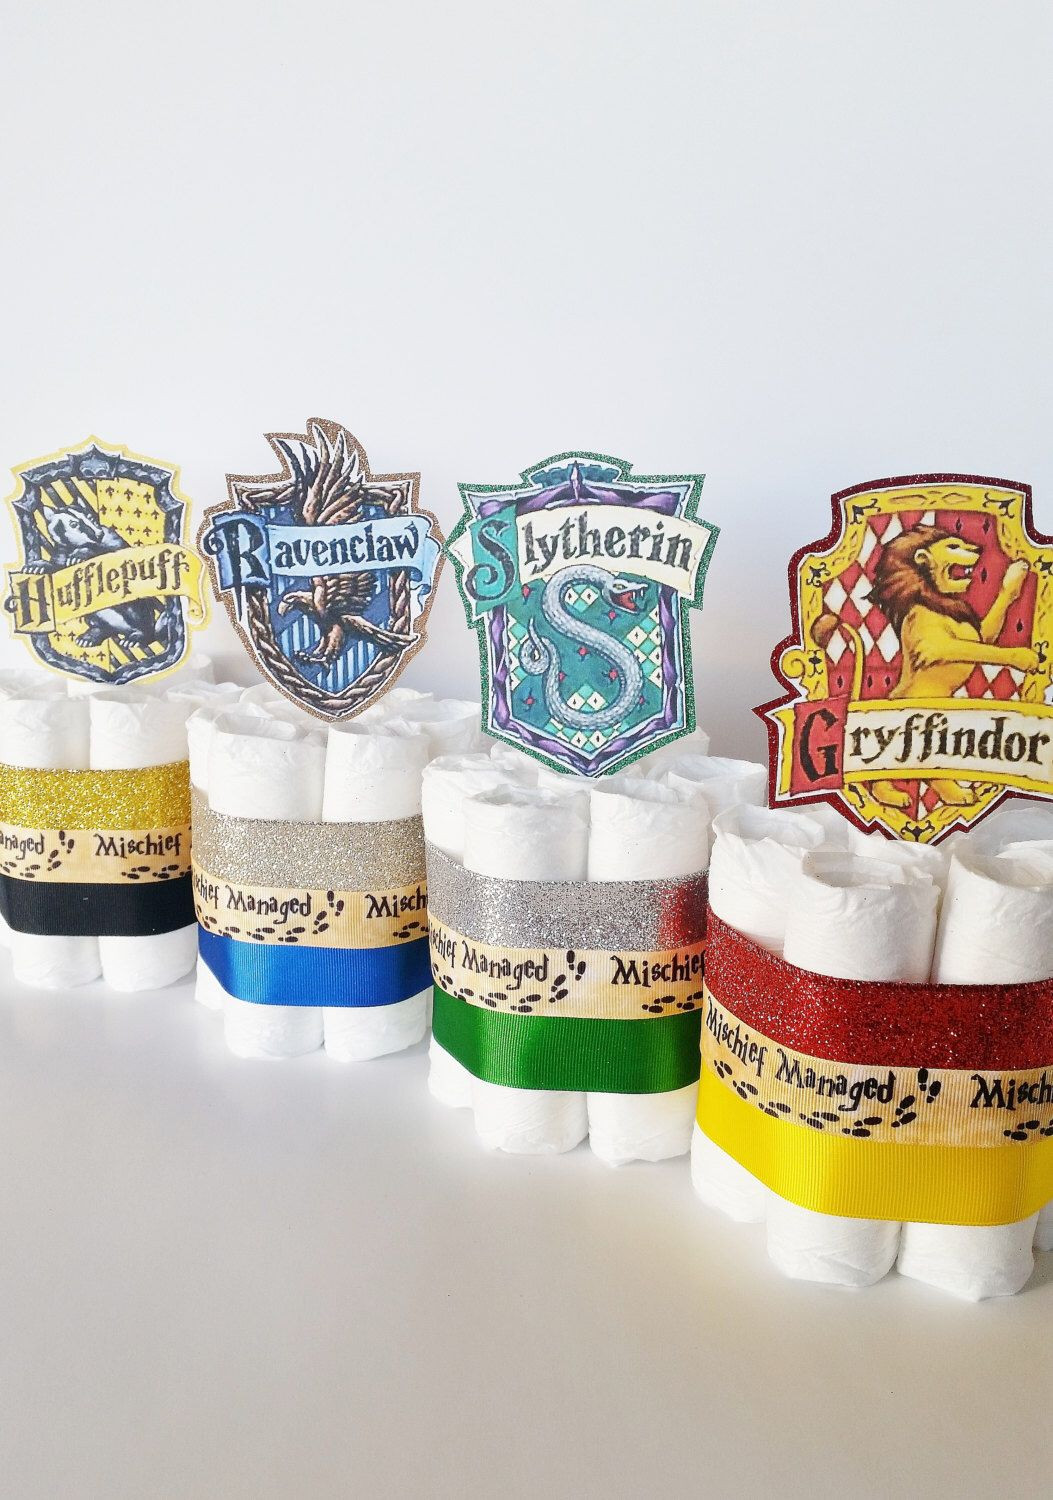 Harry Potter Baby Gift Ideas
 Pin by Kelsey Morris on babyshower